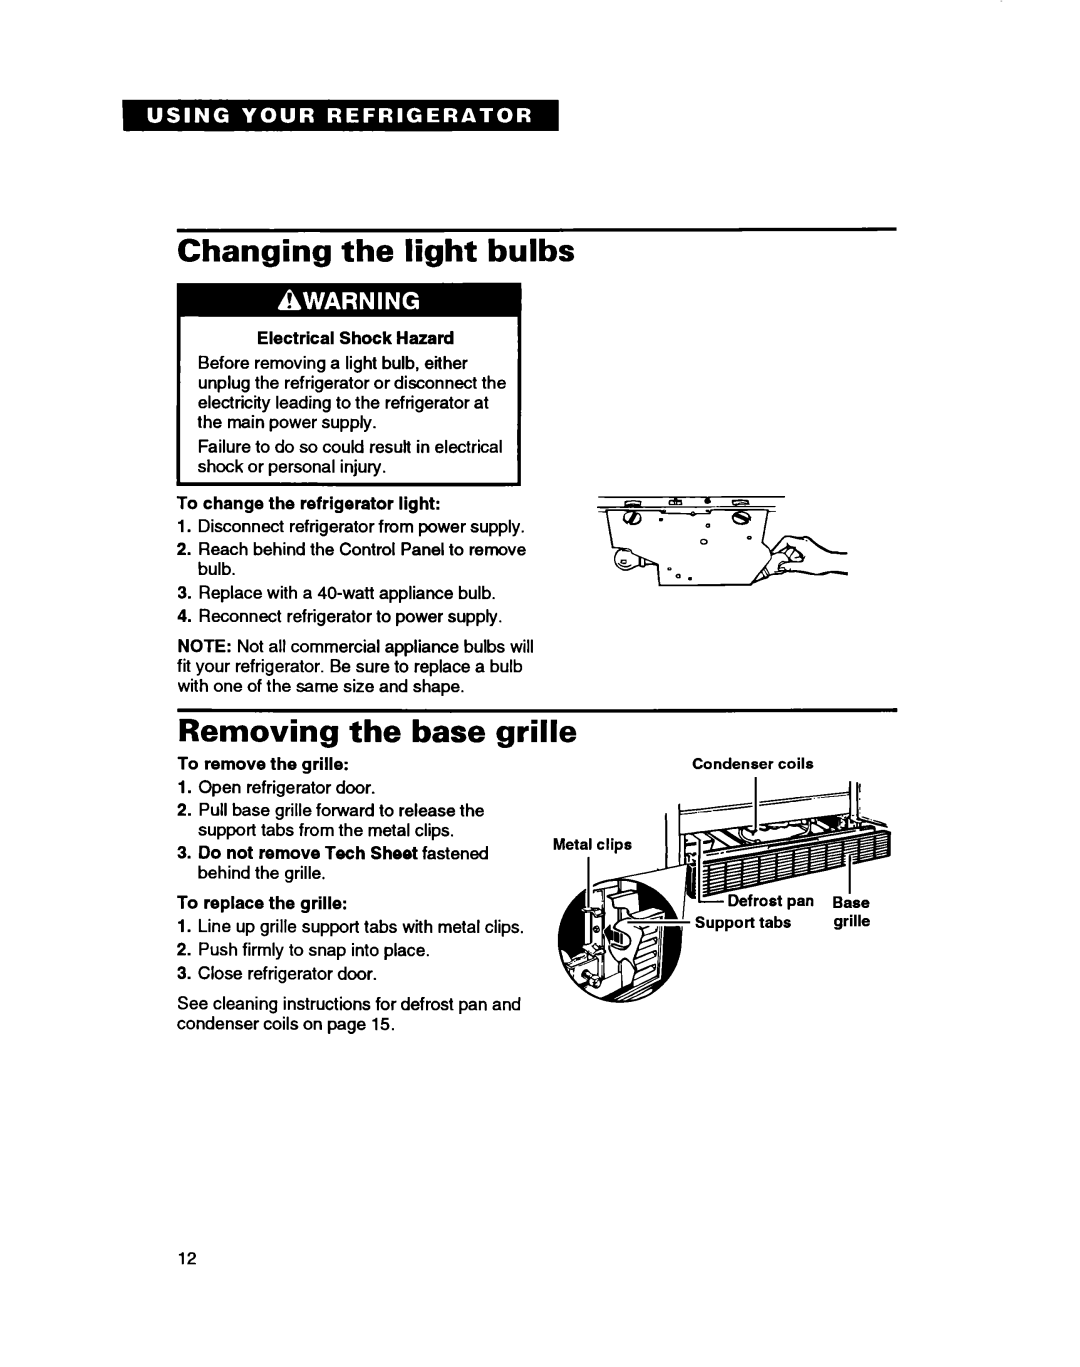 Whirlpool ETl8ZK, ETZOZK important safety instructions Changing the light bulbs, Removing the base grille 